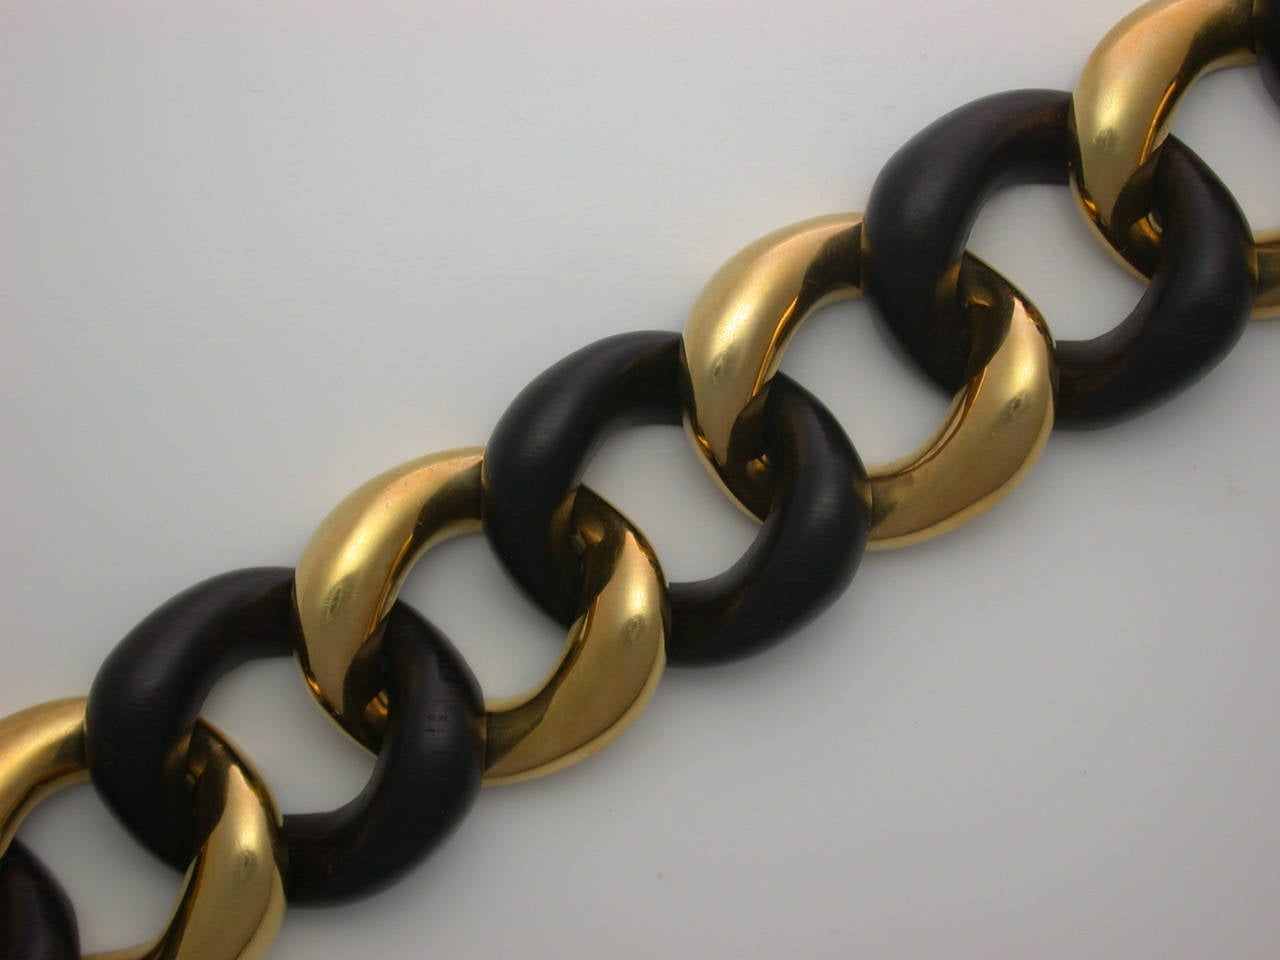 A Schepps classic, in the medium size (1 inch wide), designed as a straight row of polished yellow gold curb links alternating with carved dark chocolate brown rosewood links, beautifully flexible on the wrist, can be joined to form a choker